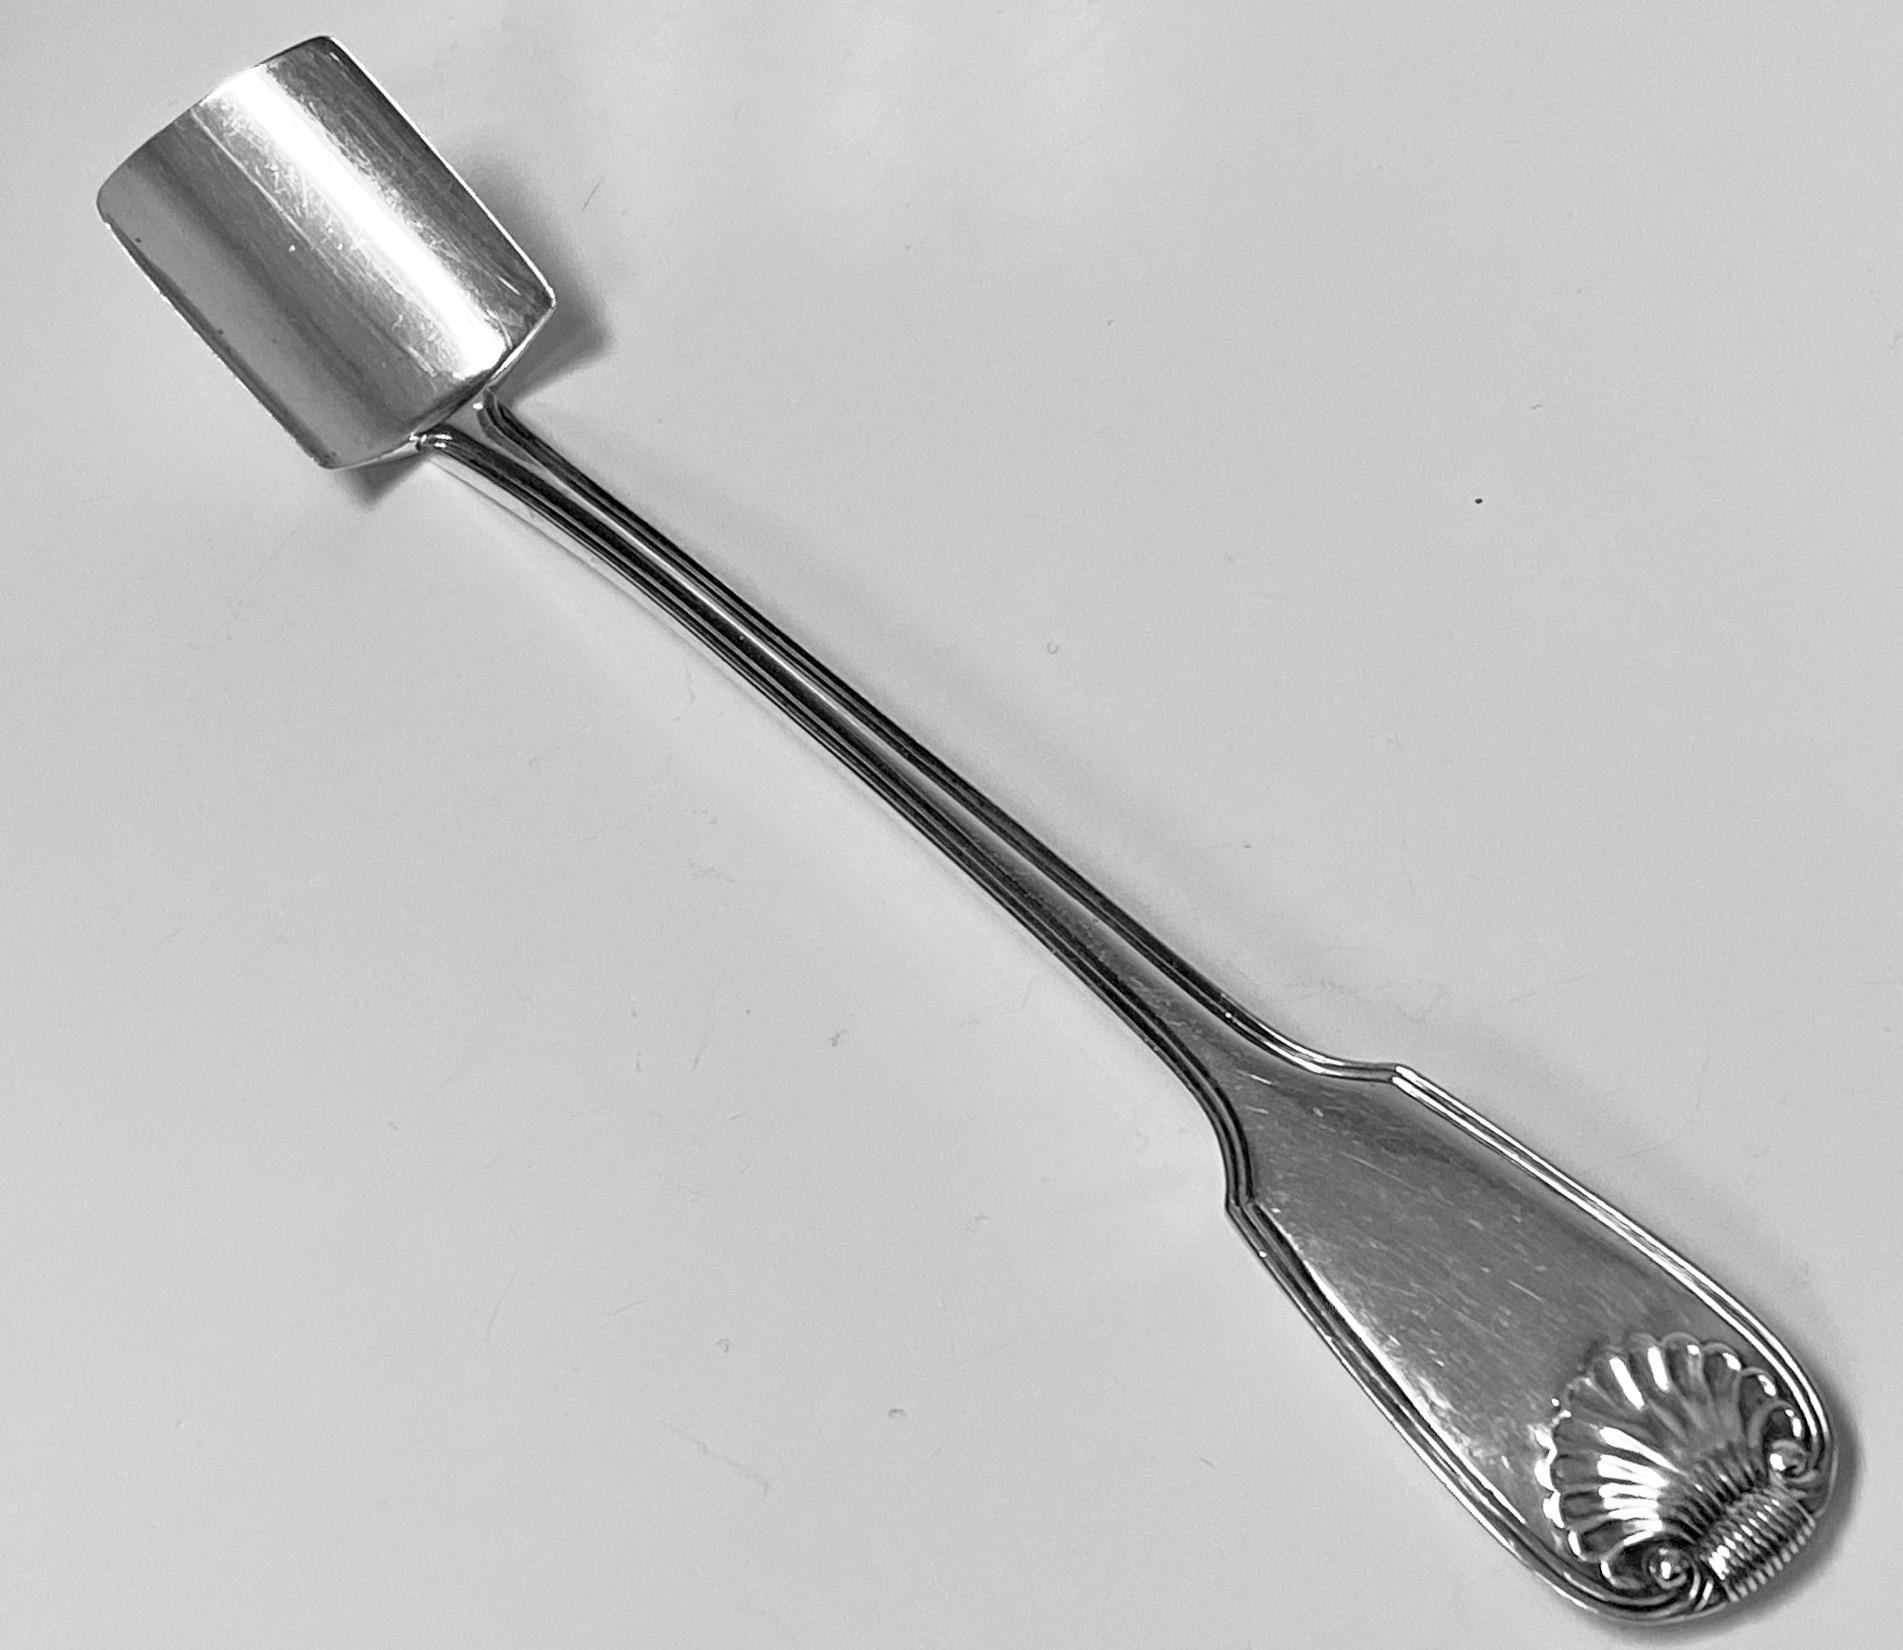 Antique Georgian silver cheese scoop, London 1813 Eley, Fearn and Chawner. Heavy gauge silver, fiddle thread and shell. No monograms. Measure: Length 10 inches. Weight 125.88 grams.